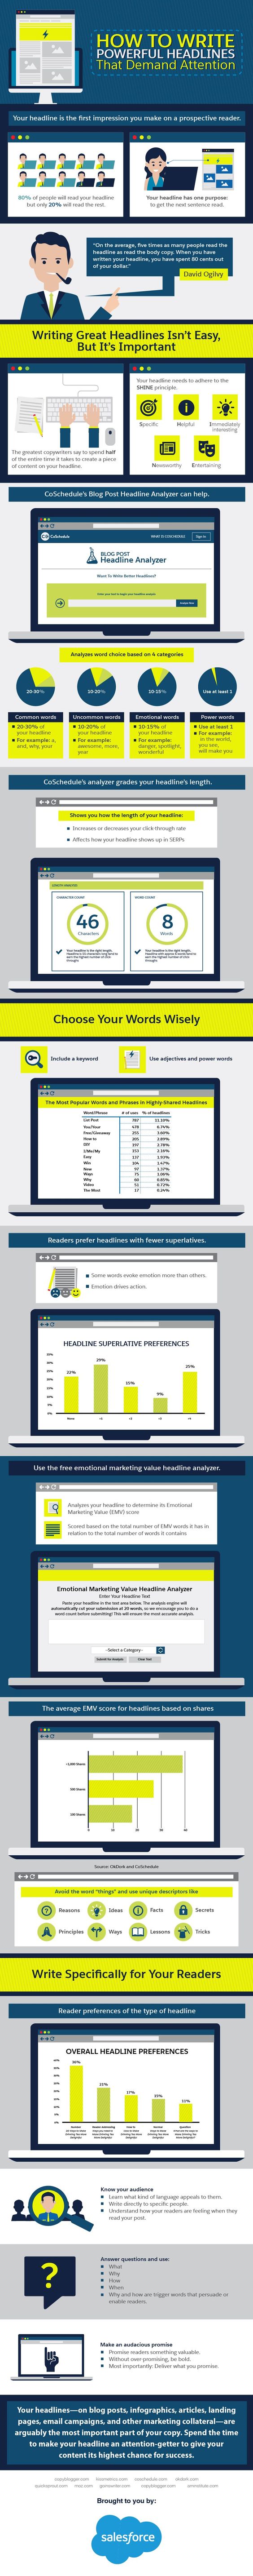 How to Write Powerful Headlines that Demand Attention - #infographic